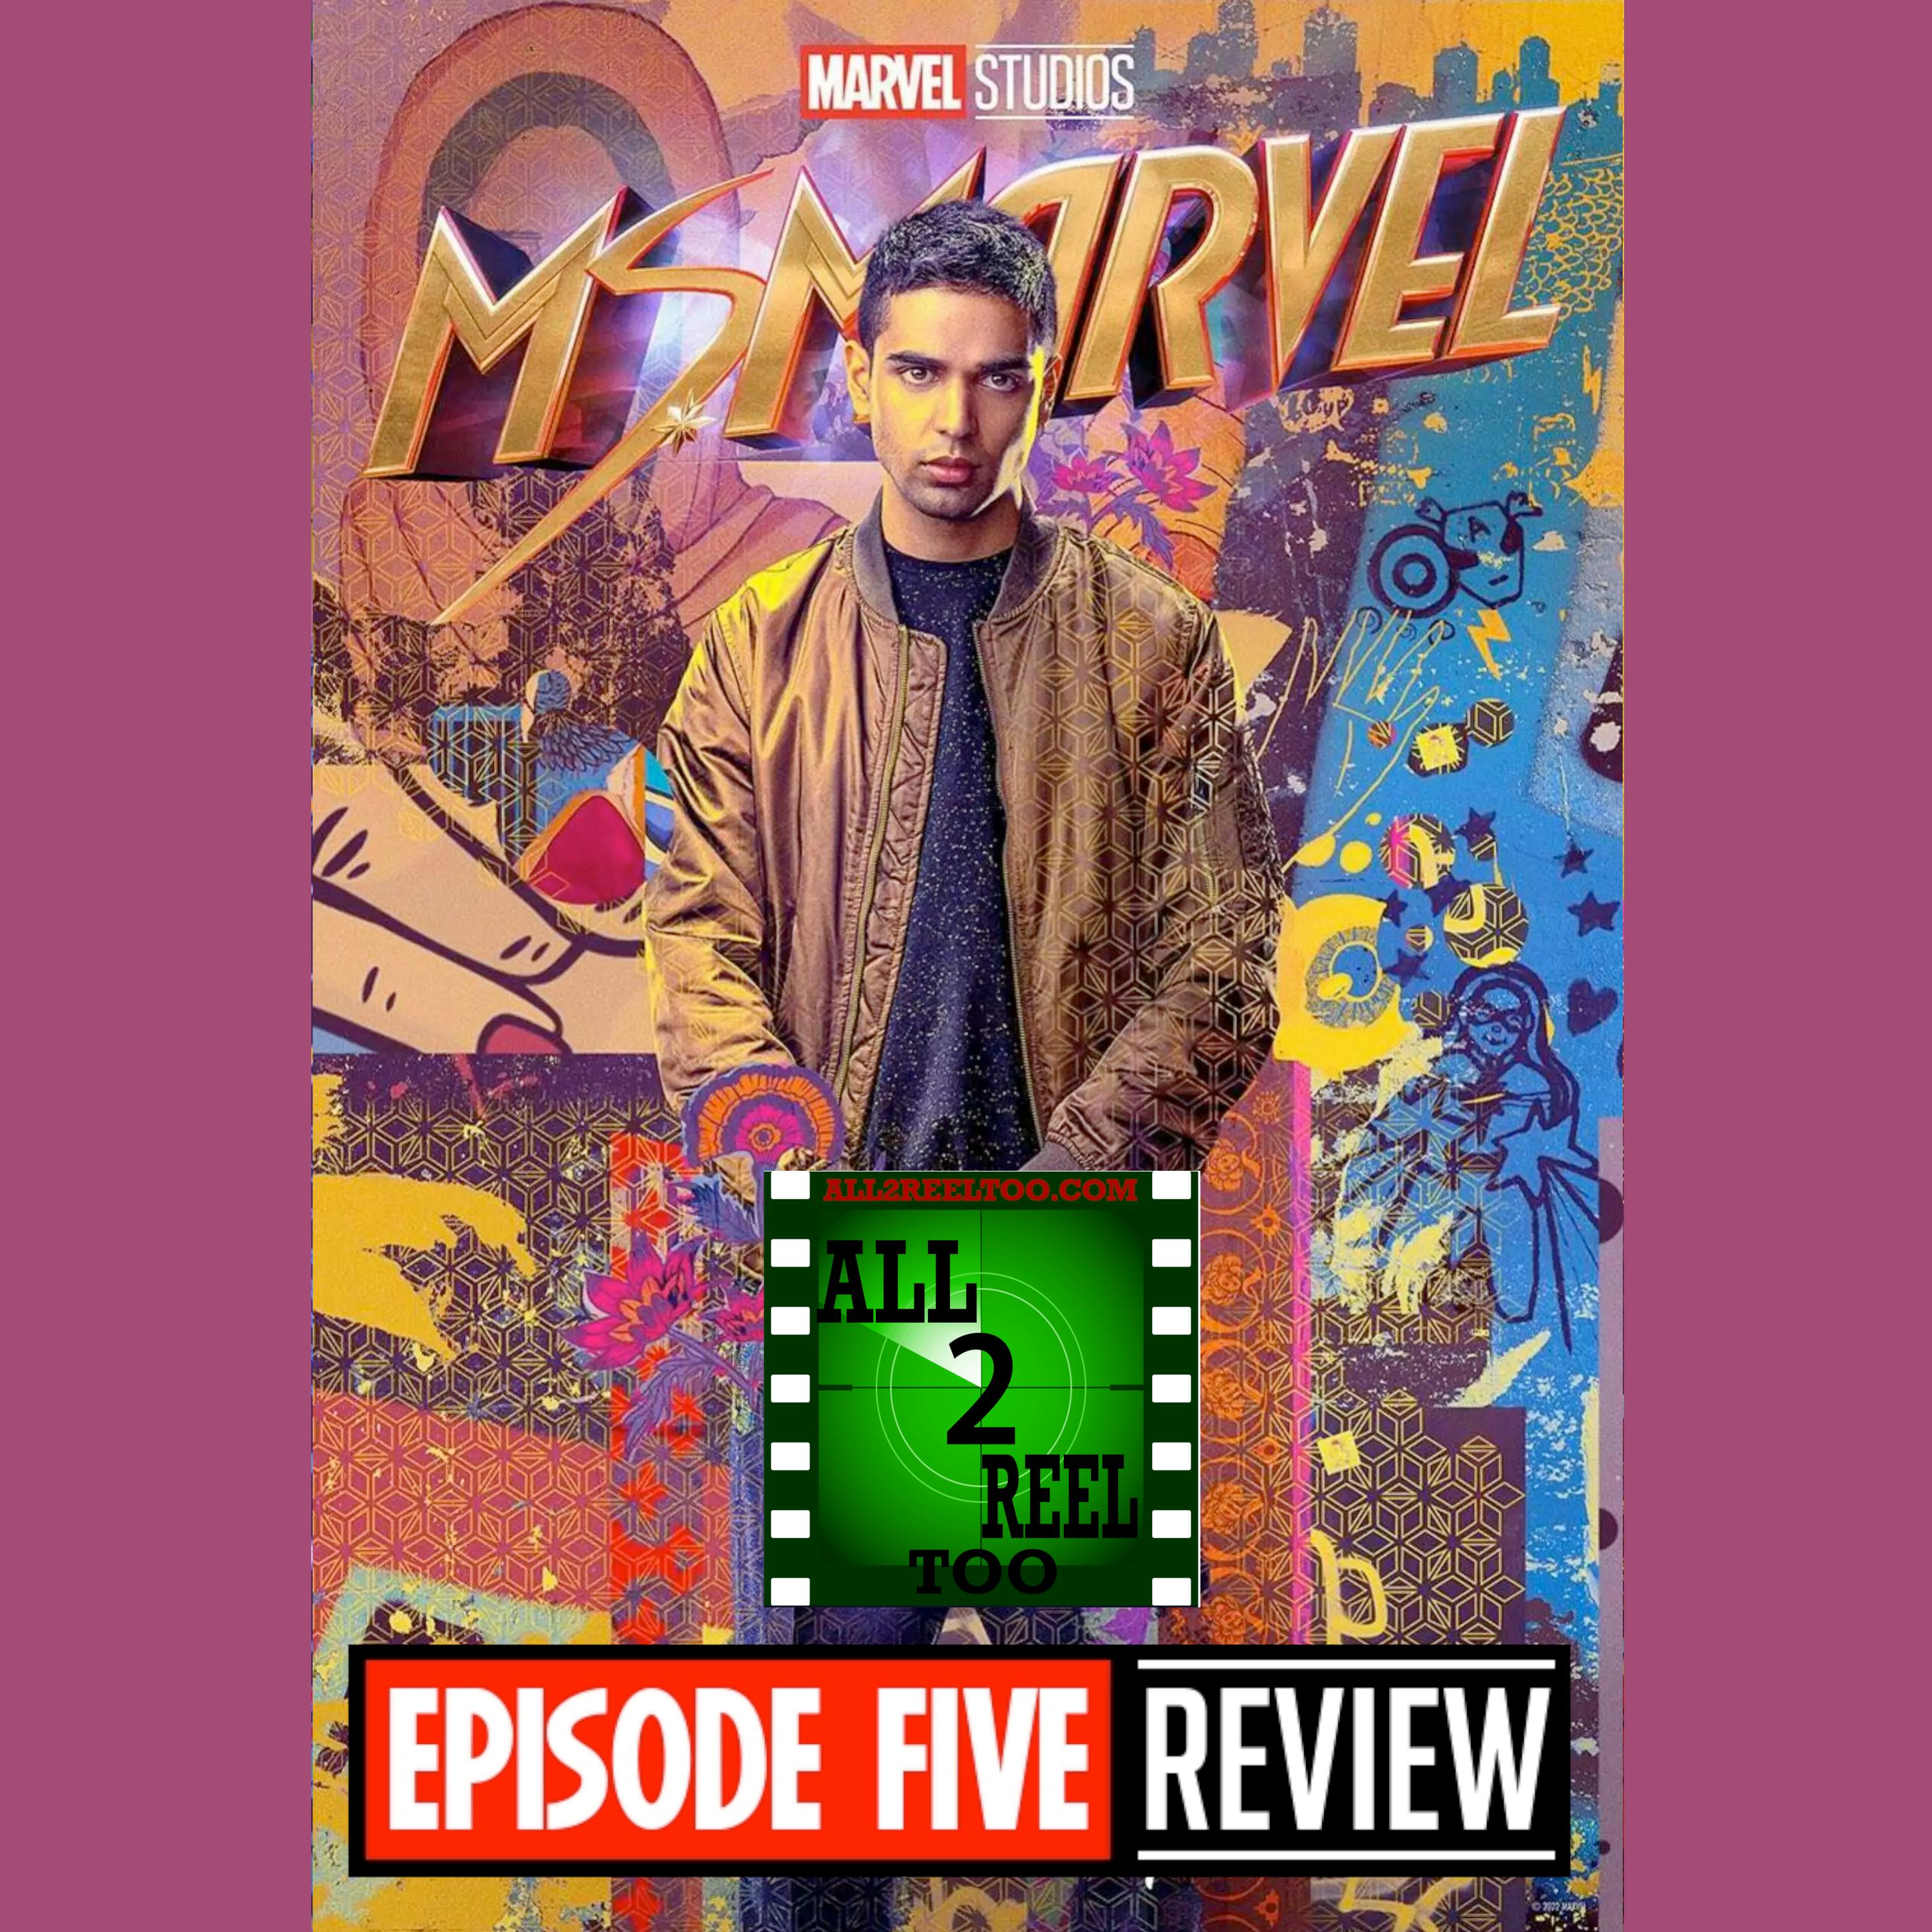 Ms. Marvel EPISODE 5 REVIEW Image